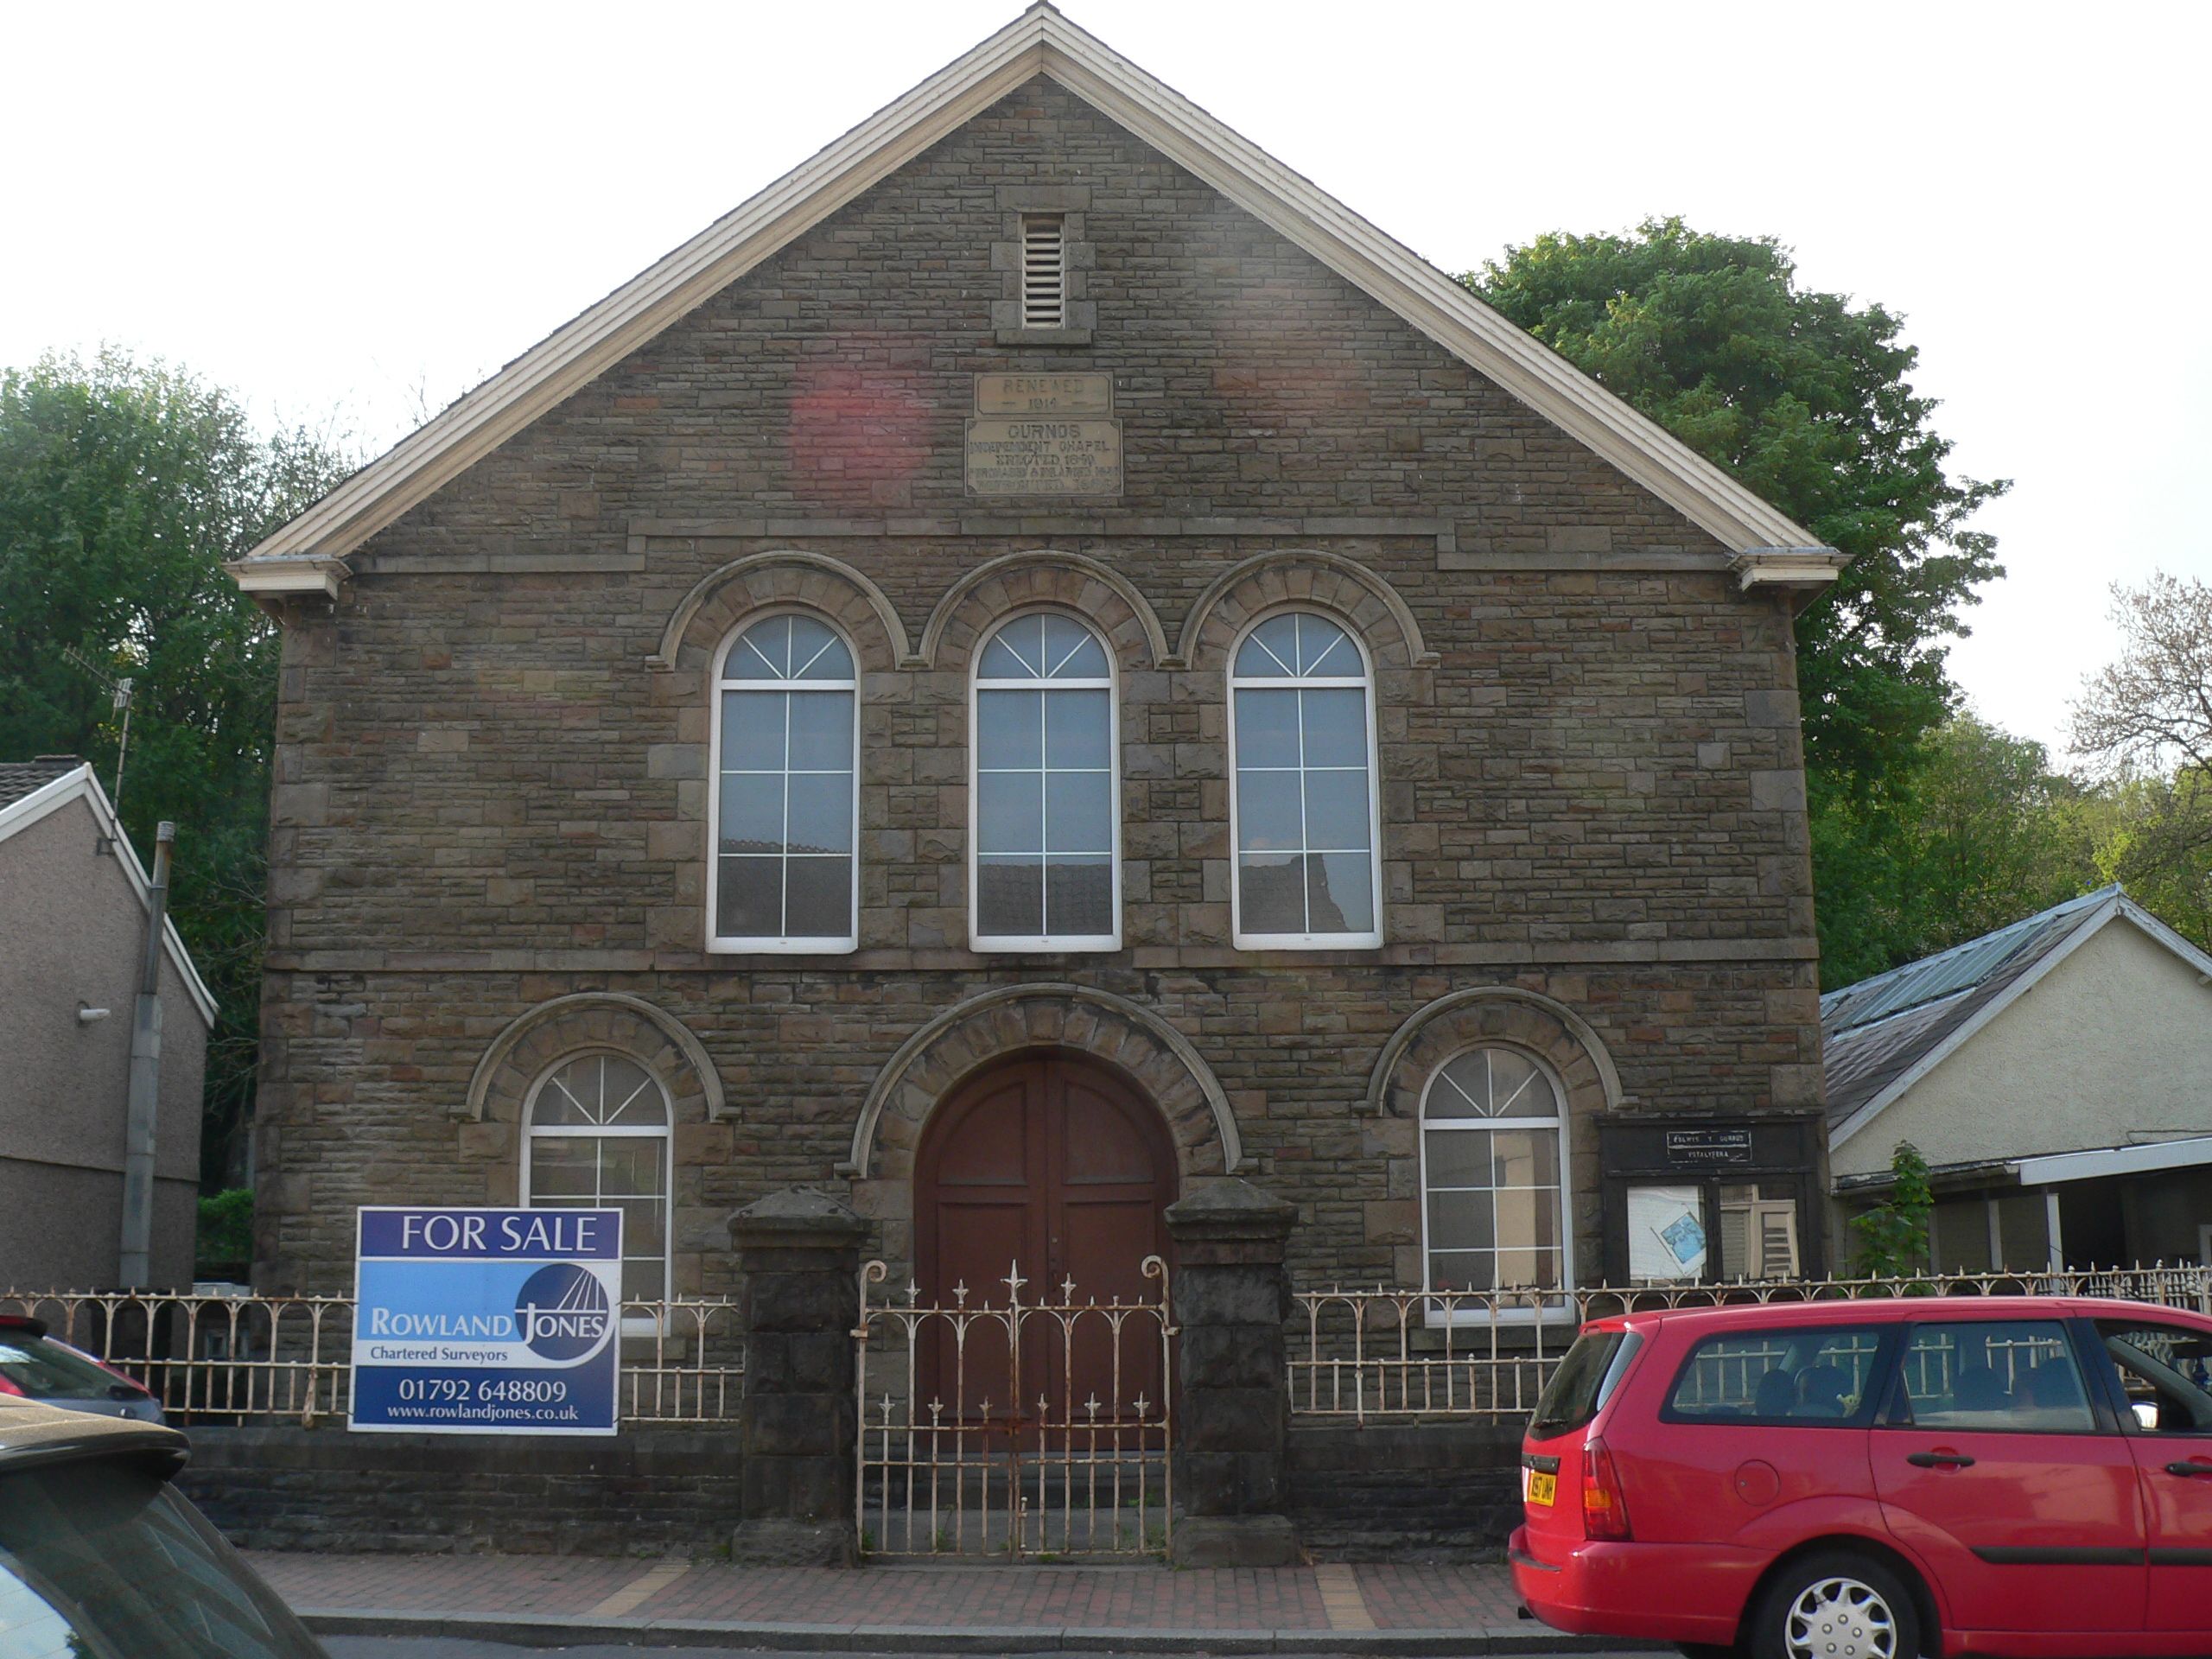 Gurnos Chapel after closure, and up for sale